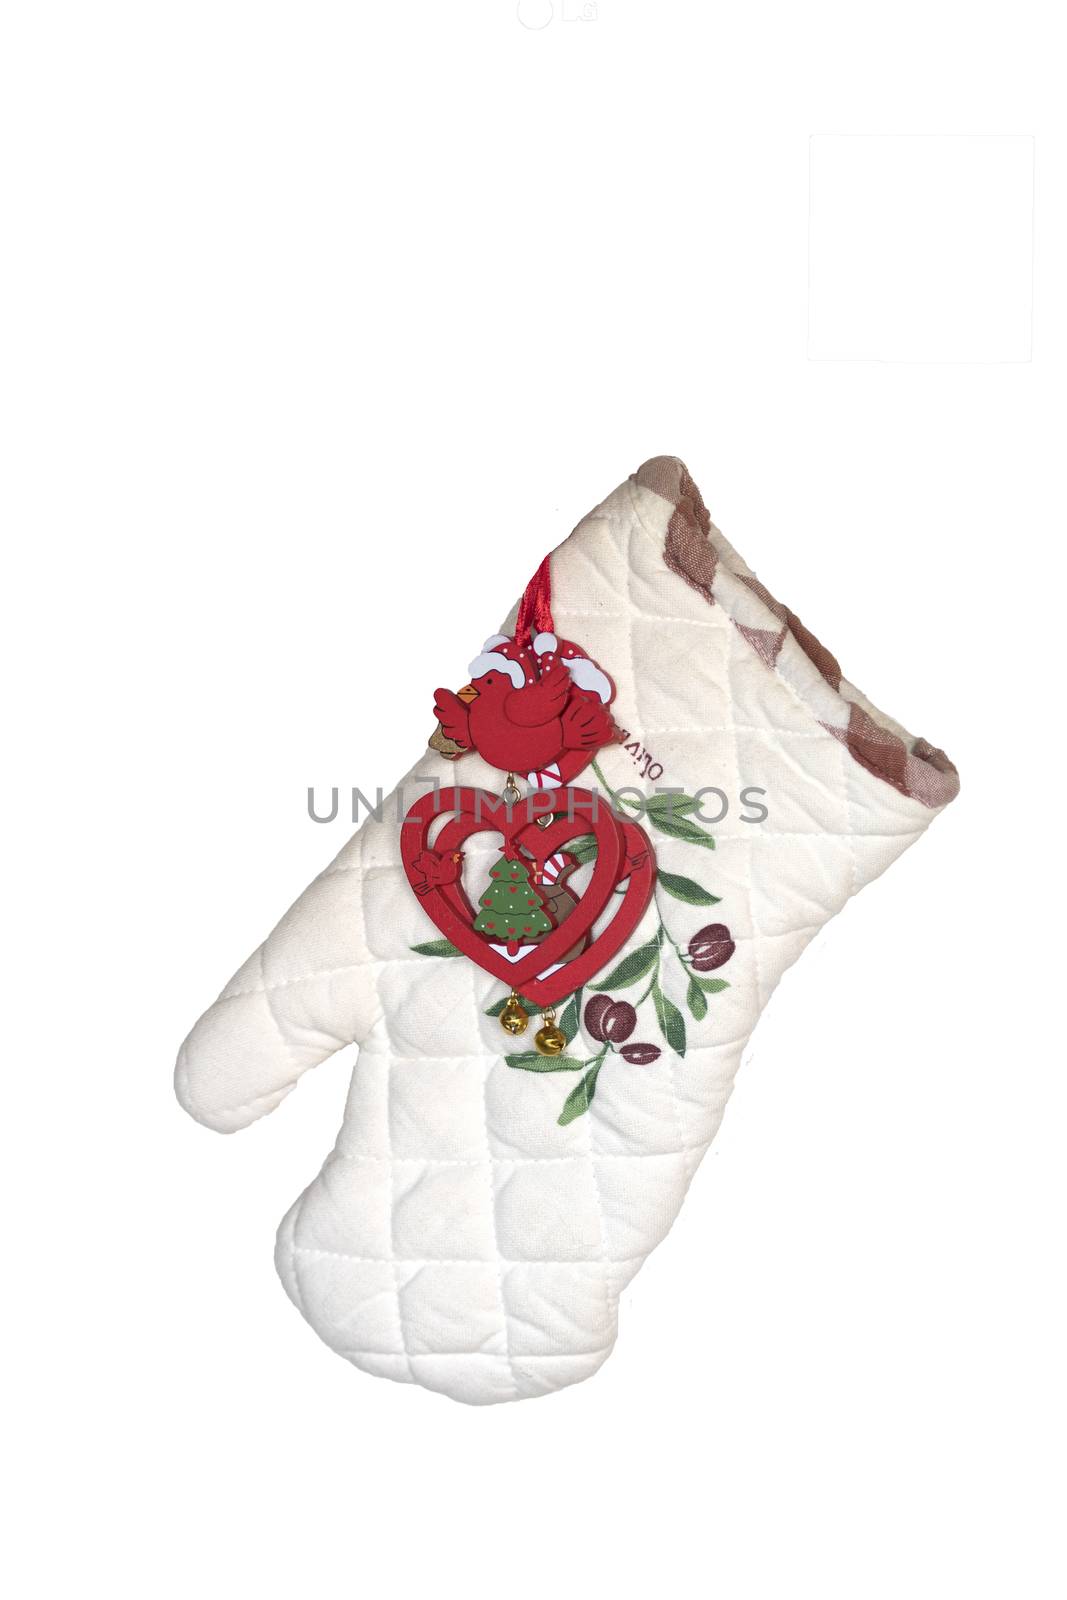 Kitchen glove with olives on white background wit red doves and  by asafaric